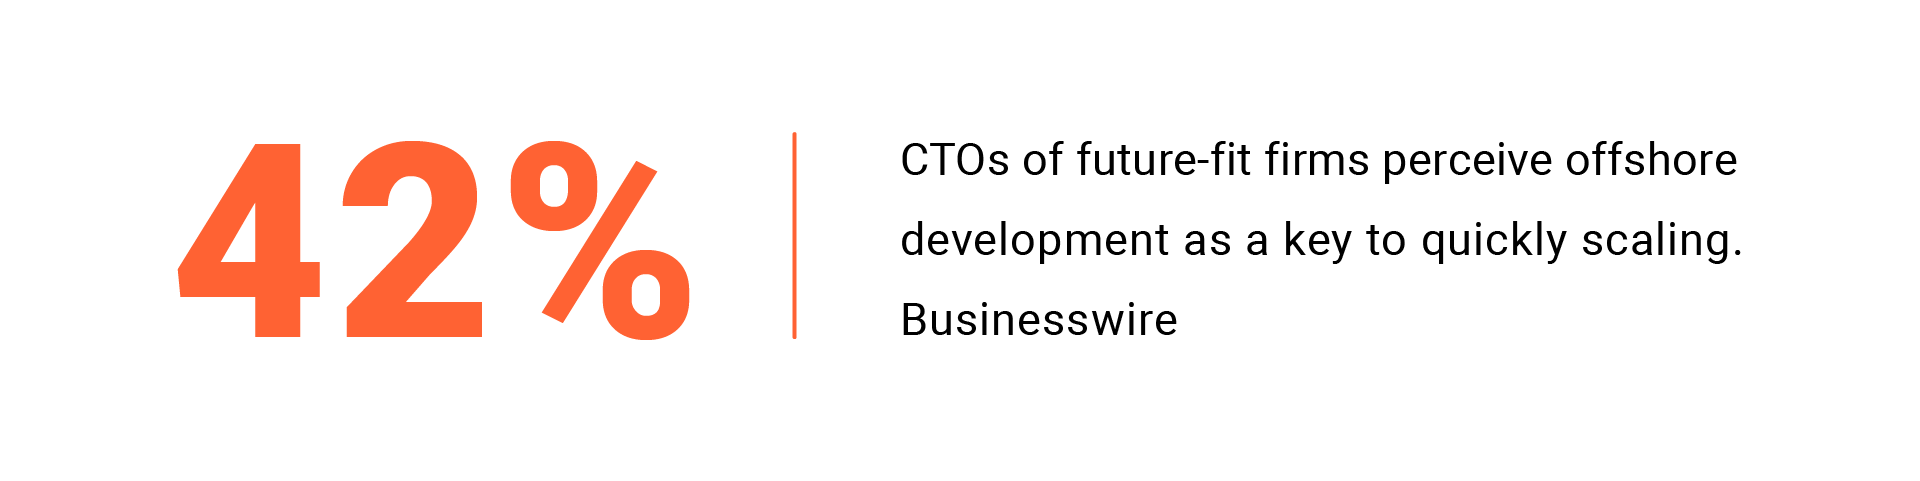 42% CTOs of future-fit firms perceive offshore development as a key to quickly scaling